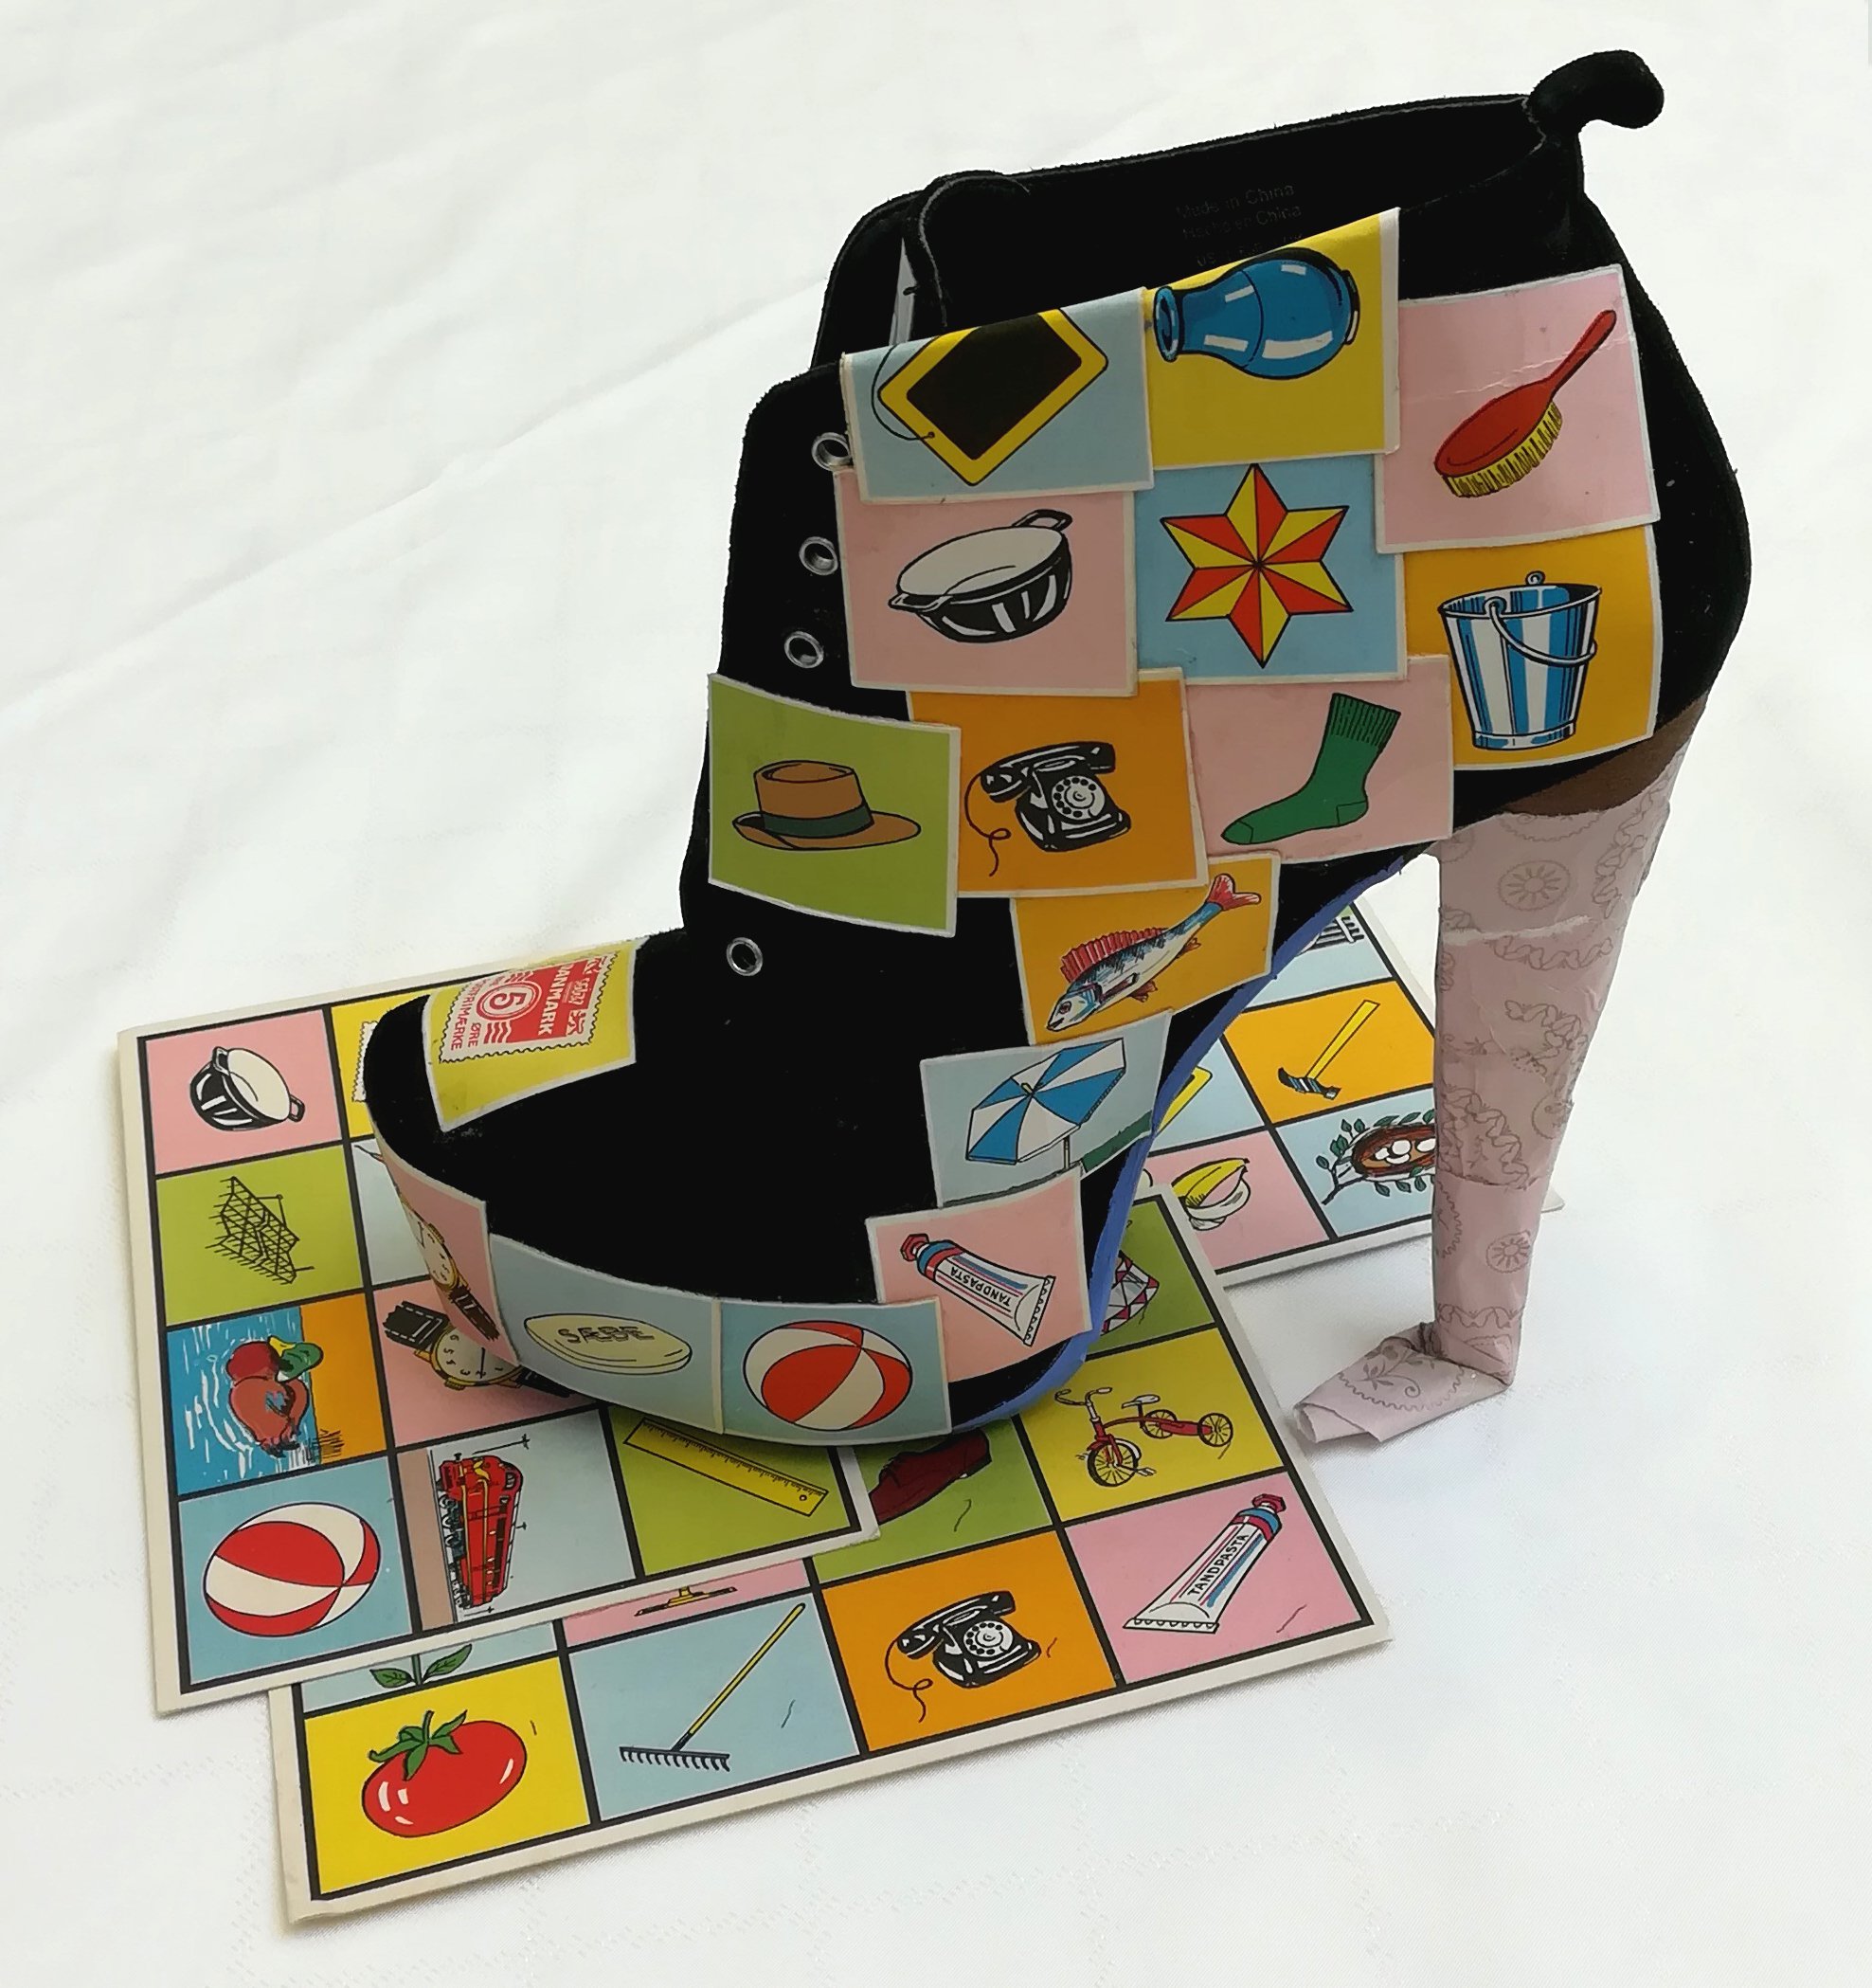 Picture Lottery Liberty Shoe / Shoe, picture lottery, paper / 22 x 26 x 30 cm / 2021